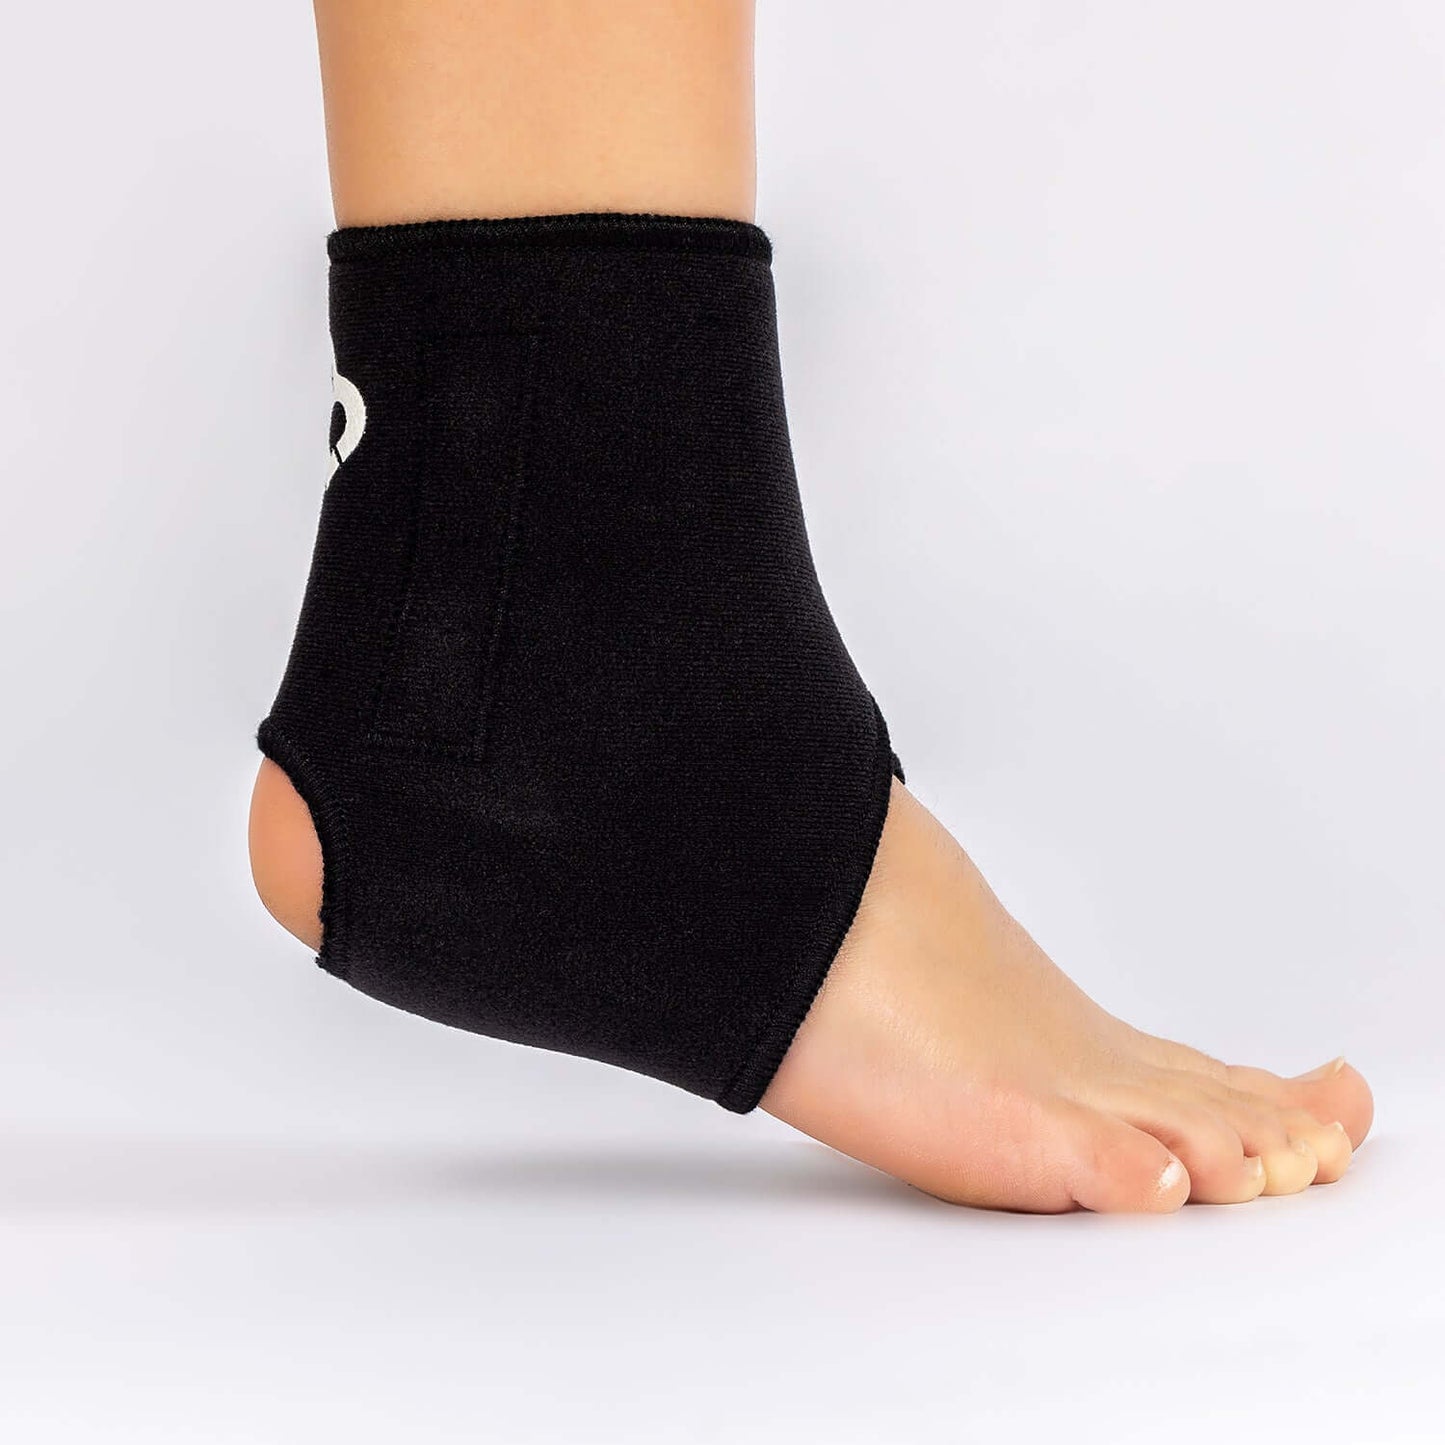 The Bio Magnetic Ankle Support in Black is loaded with 8 therapeutic grade magnets and offers incredible support and compression to the injured ankle.